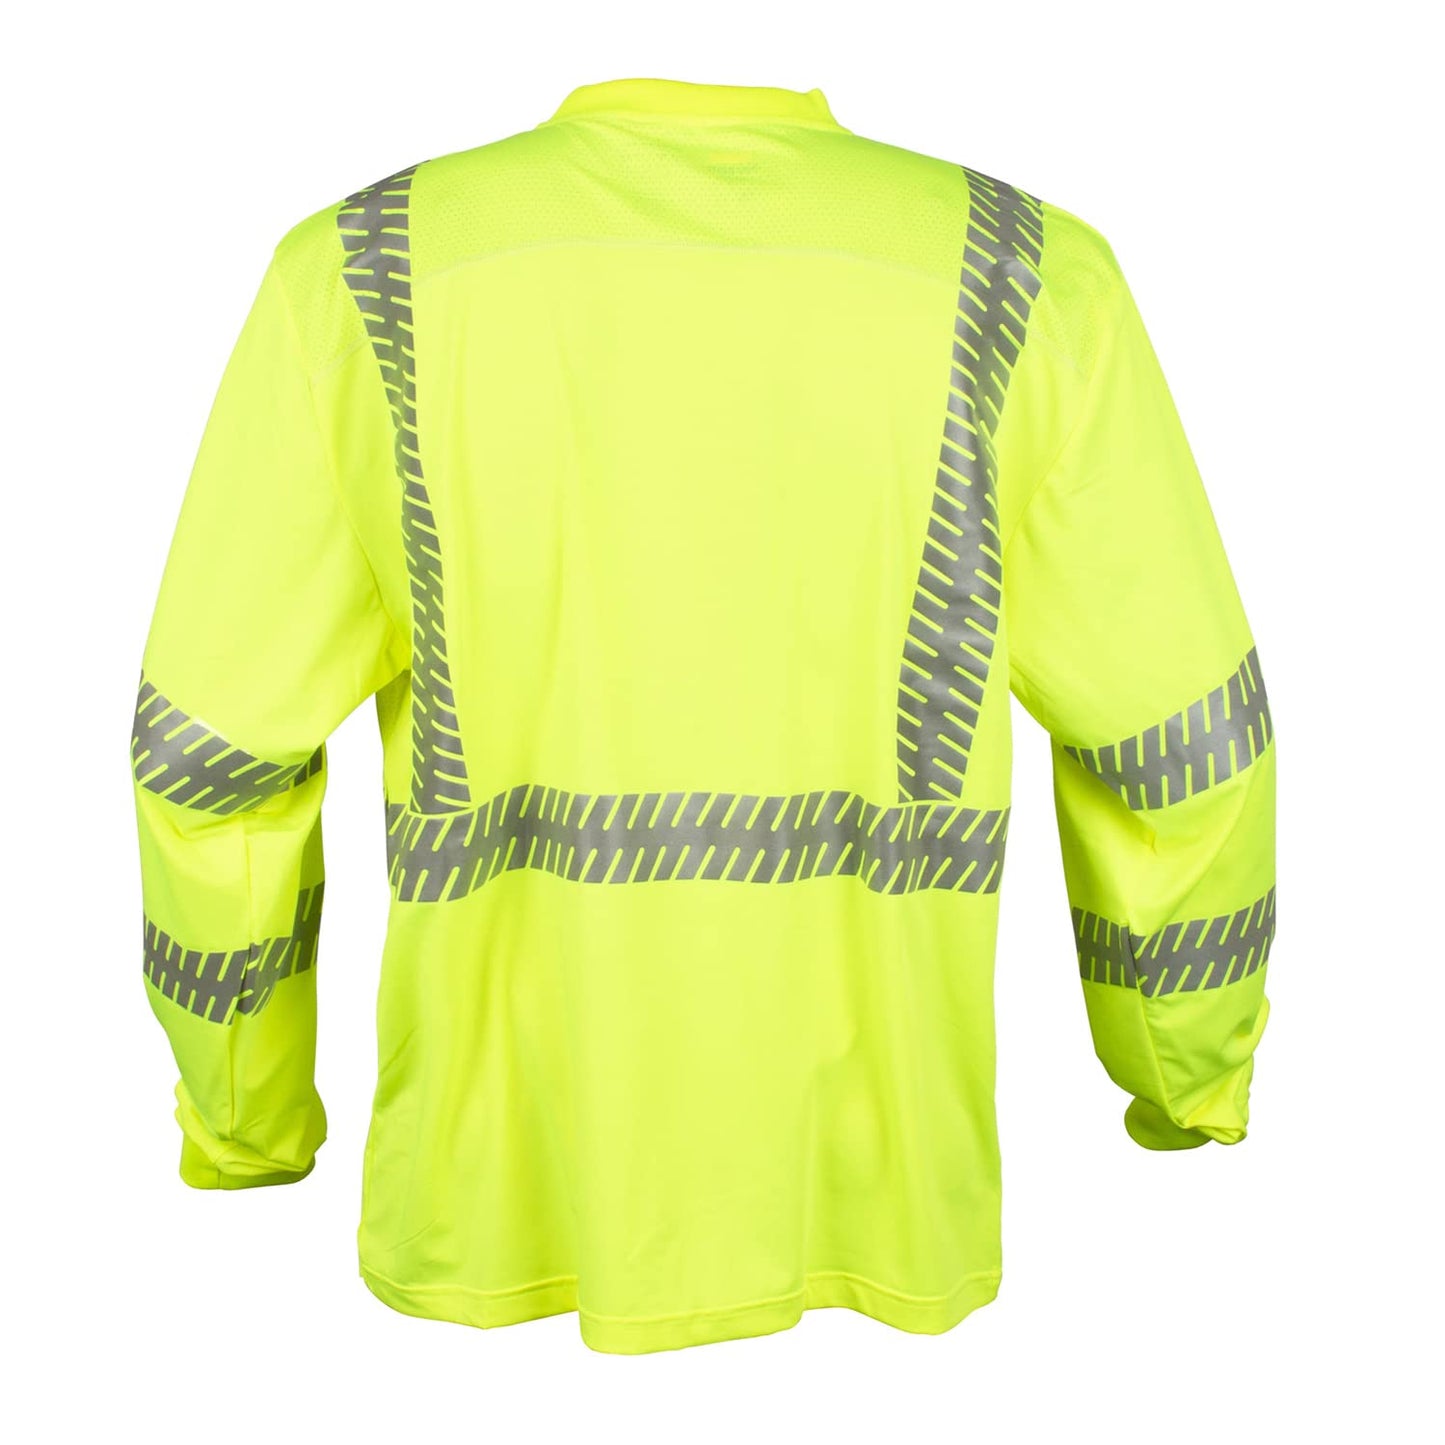 Type R, Class III, High-Visibility Comfort Stretch T-Shirt, Long Sleeves, Chest Pocket